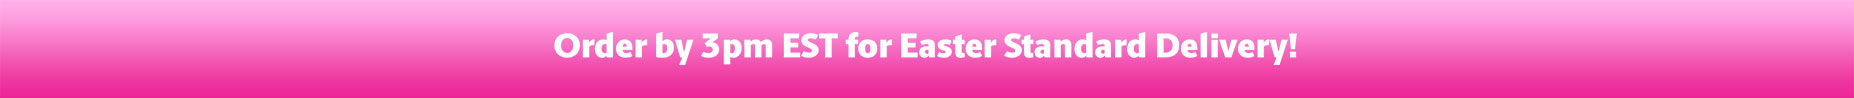 Order by 3PM EST for Easter Standard Delivery